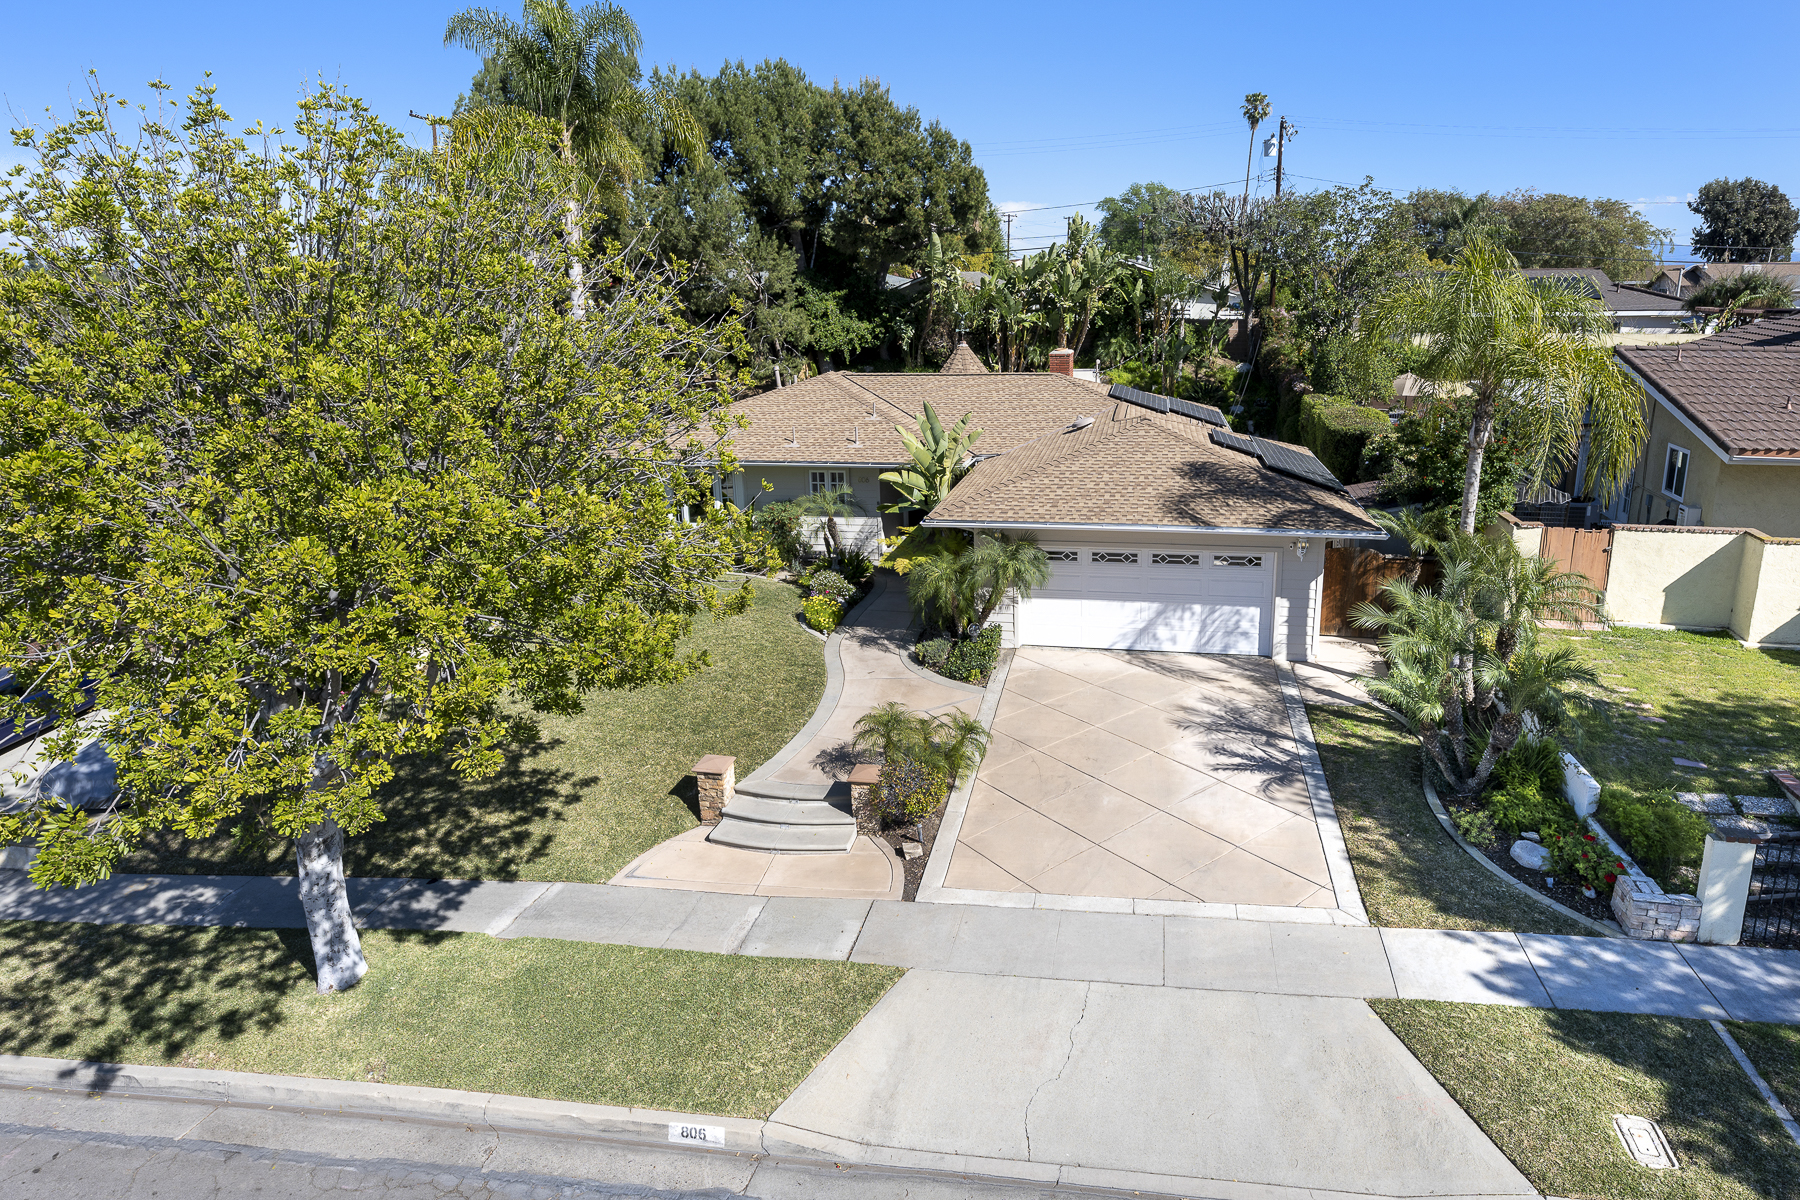 806 N. Adlena Drive, Fullerton, CA 92833: Aerial view of front of house, garage and driveway.